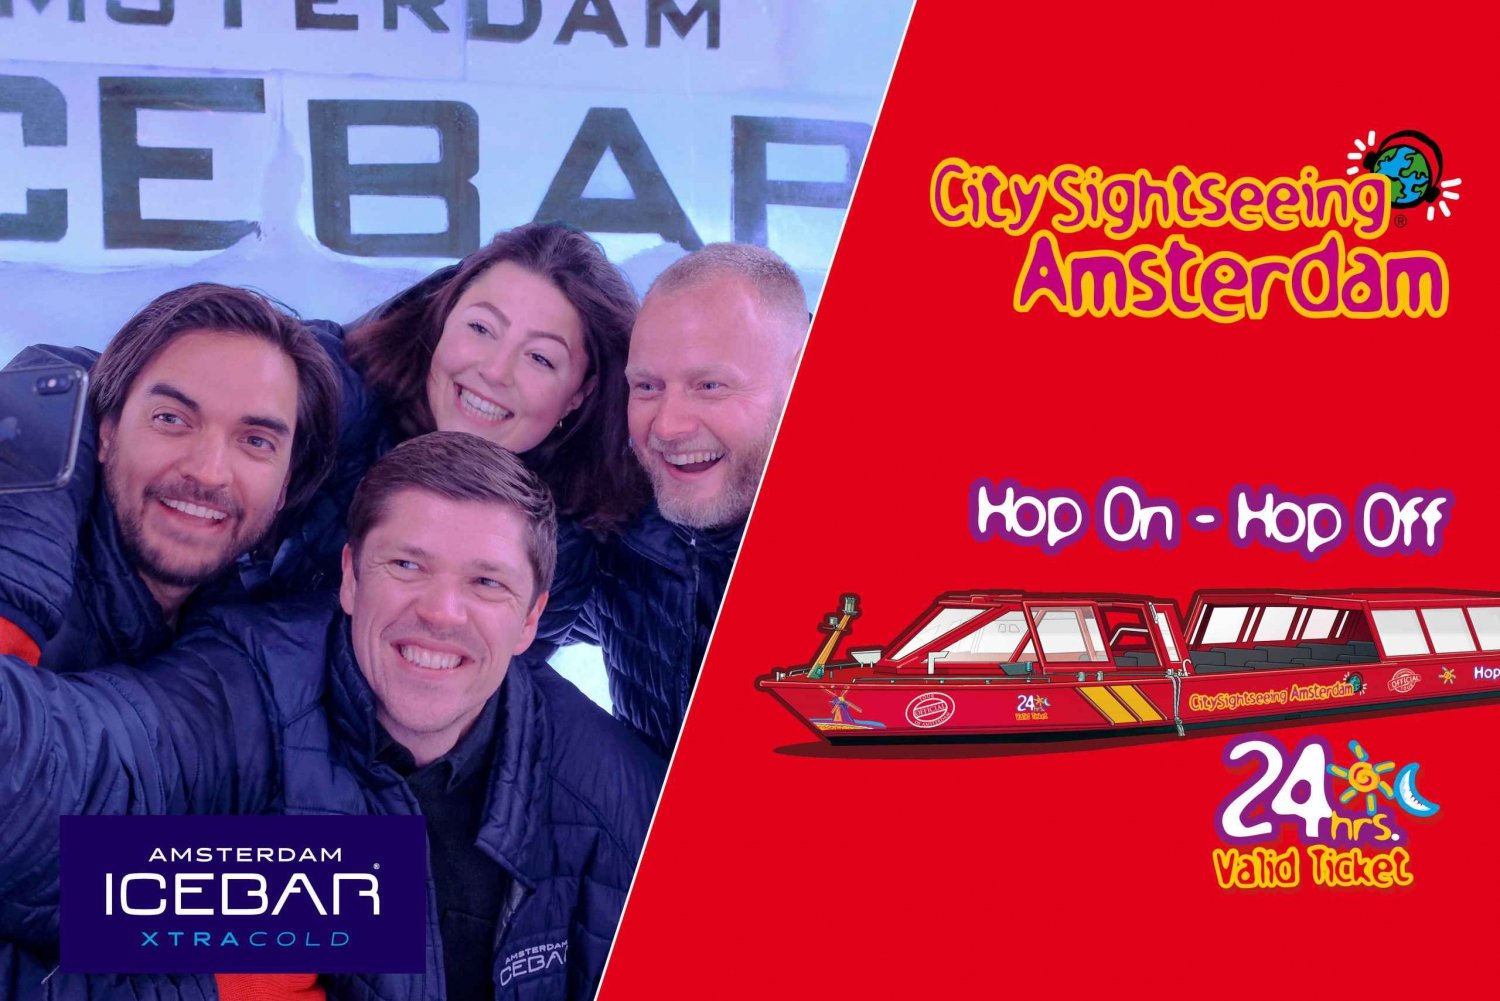 Amsterdã: Barco Hop-On Hop-Off 24 Horas e XtraCold Icebar